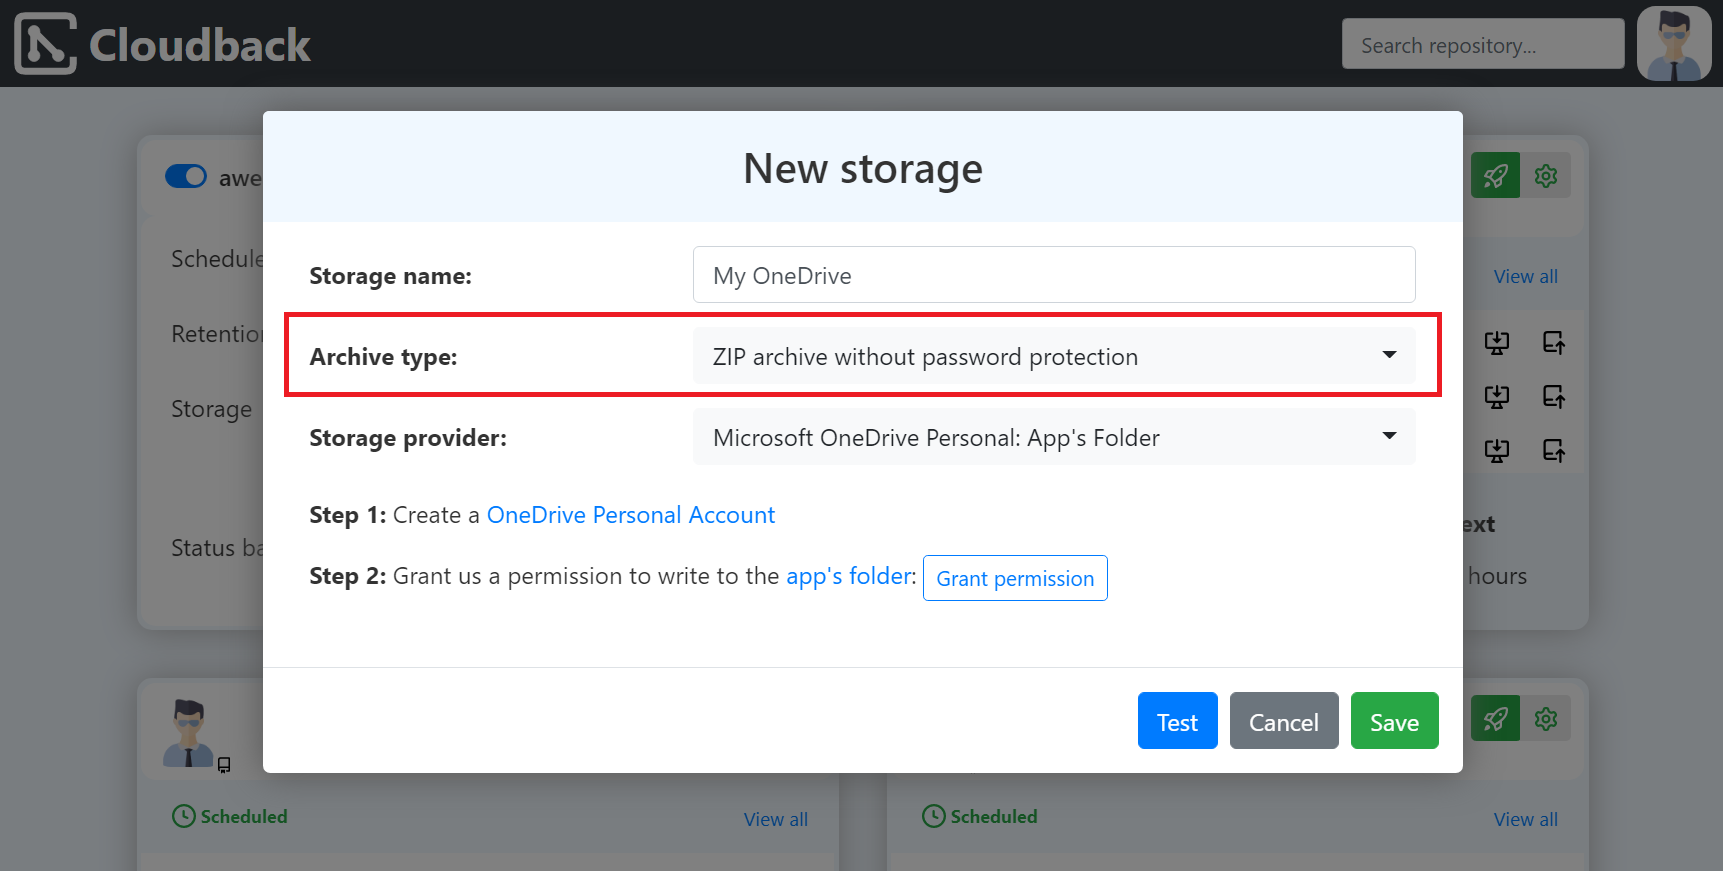 Select archive type of the new Cloudback storage